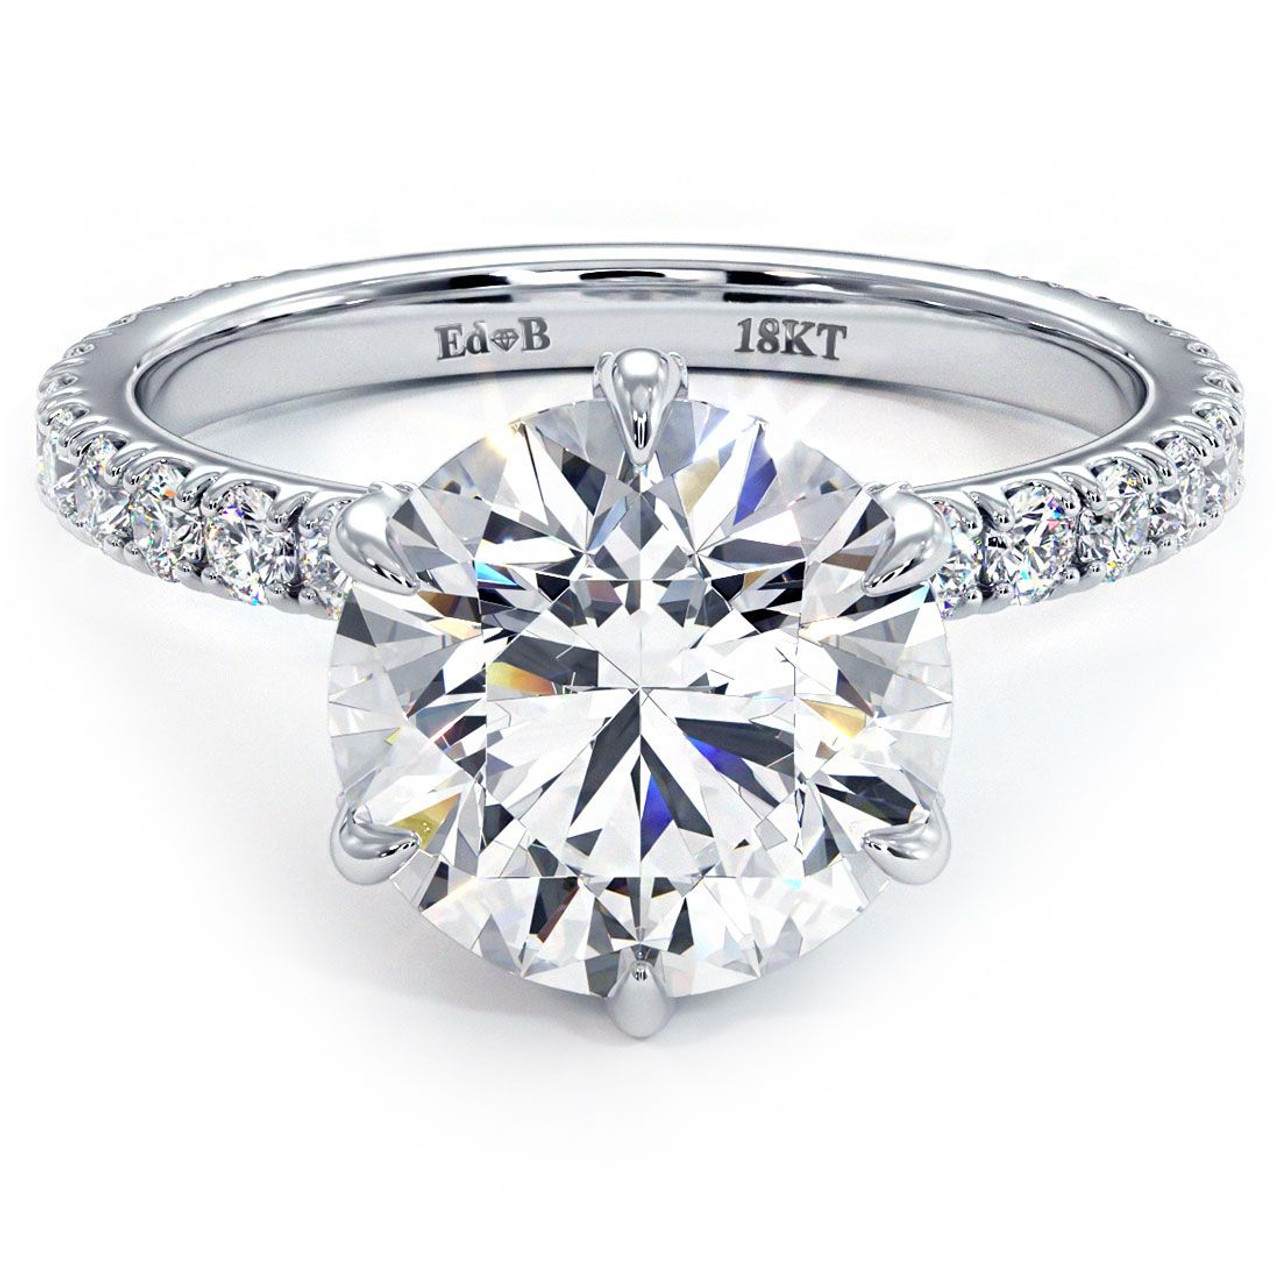 Classic 6 Prong Solitaire Engagement Ring Setting